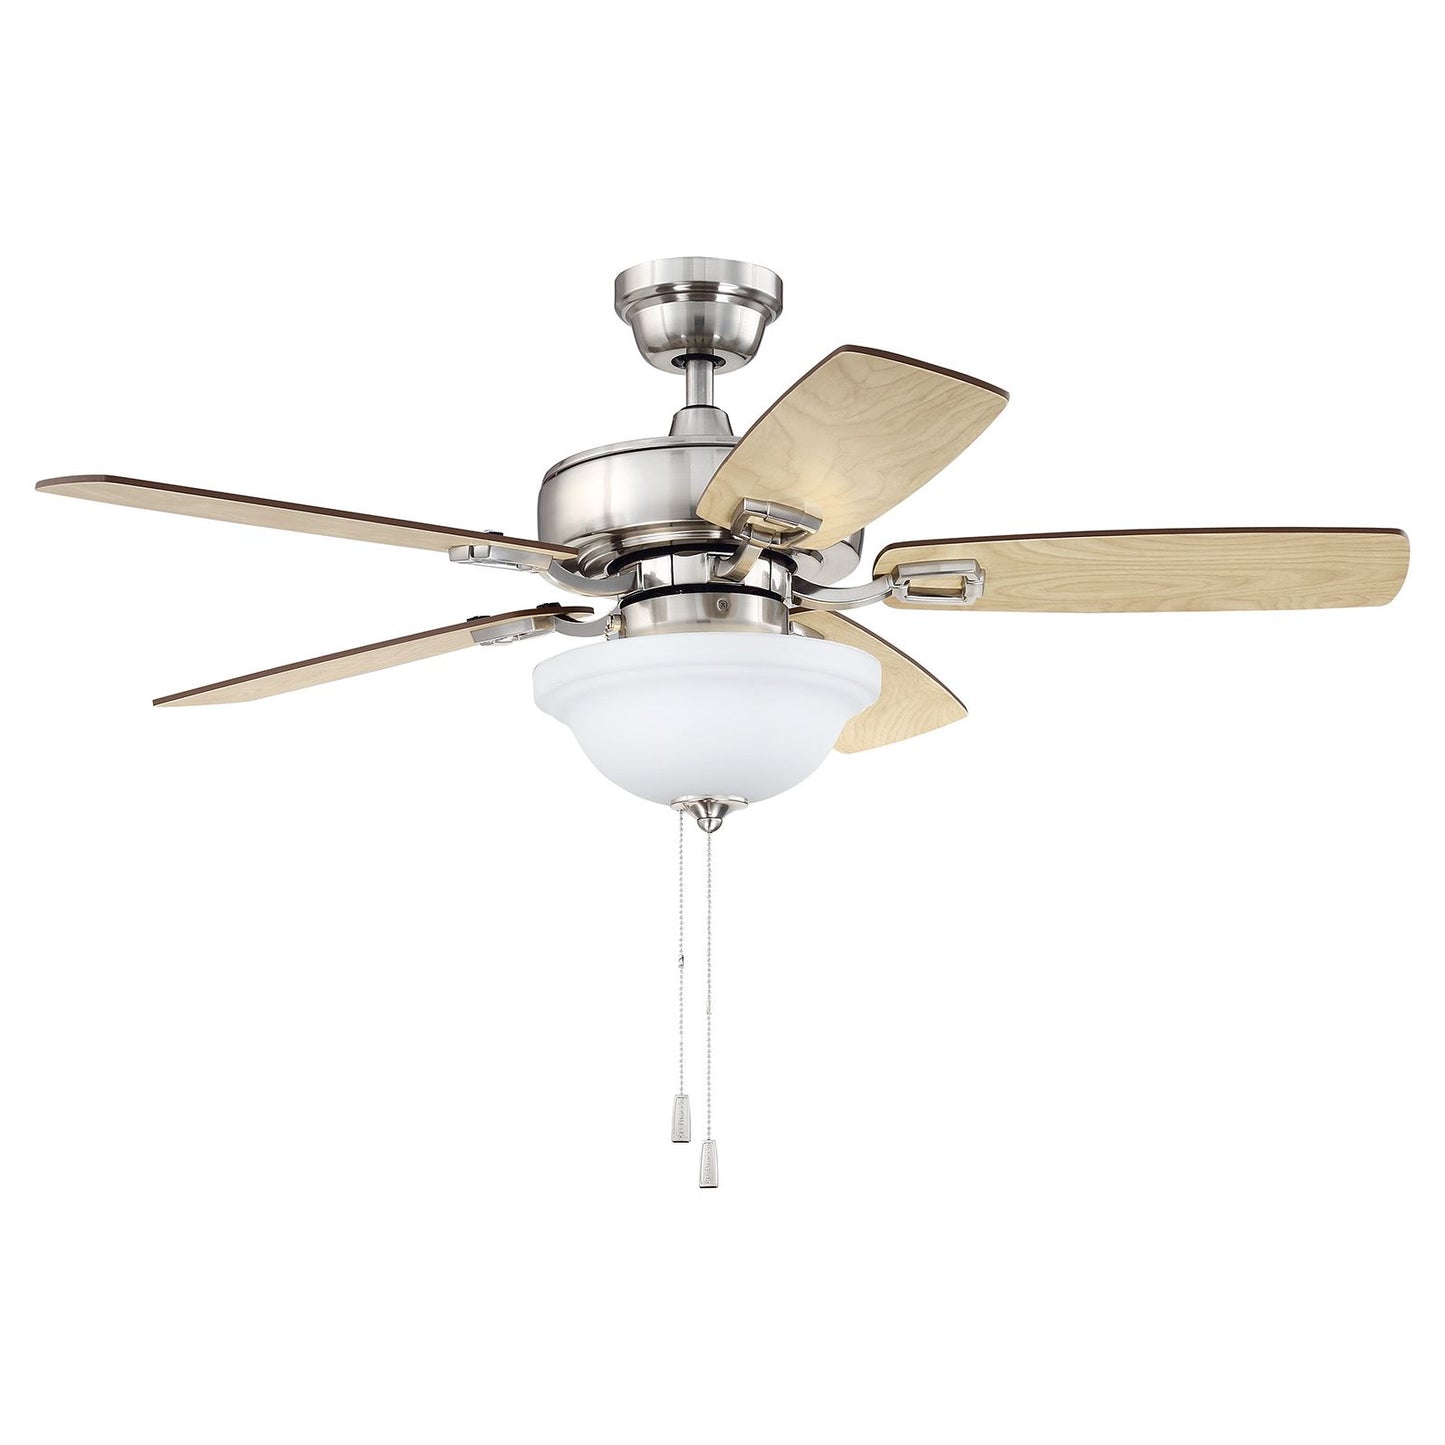 TCE42BNK5C1 - Twist N Click 42" 5 Blade Ceiling Fan with Light Kit - Pull Chain - Brushed Polished N